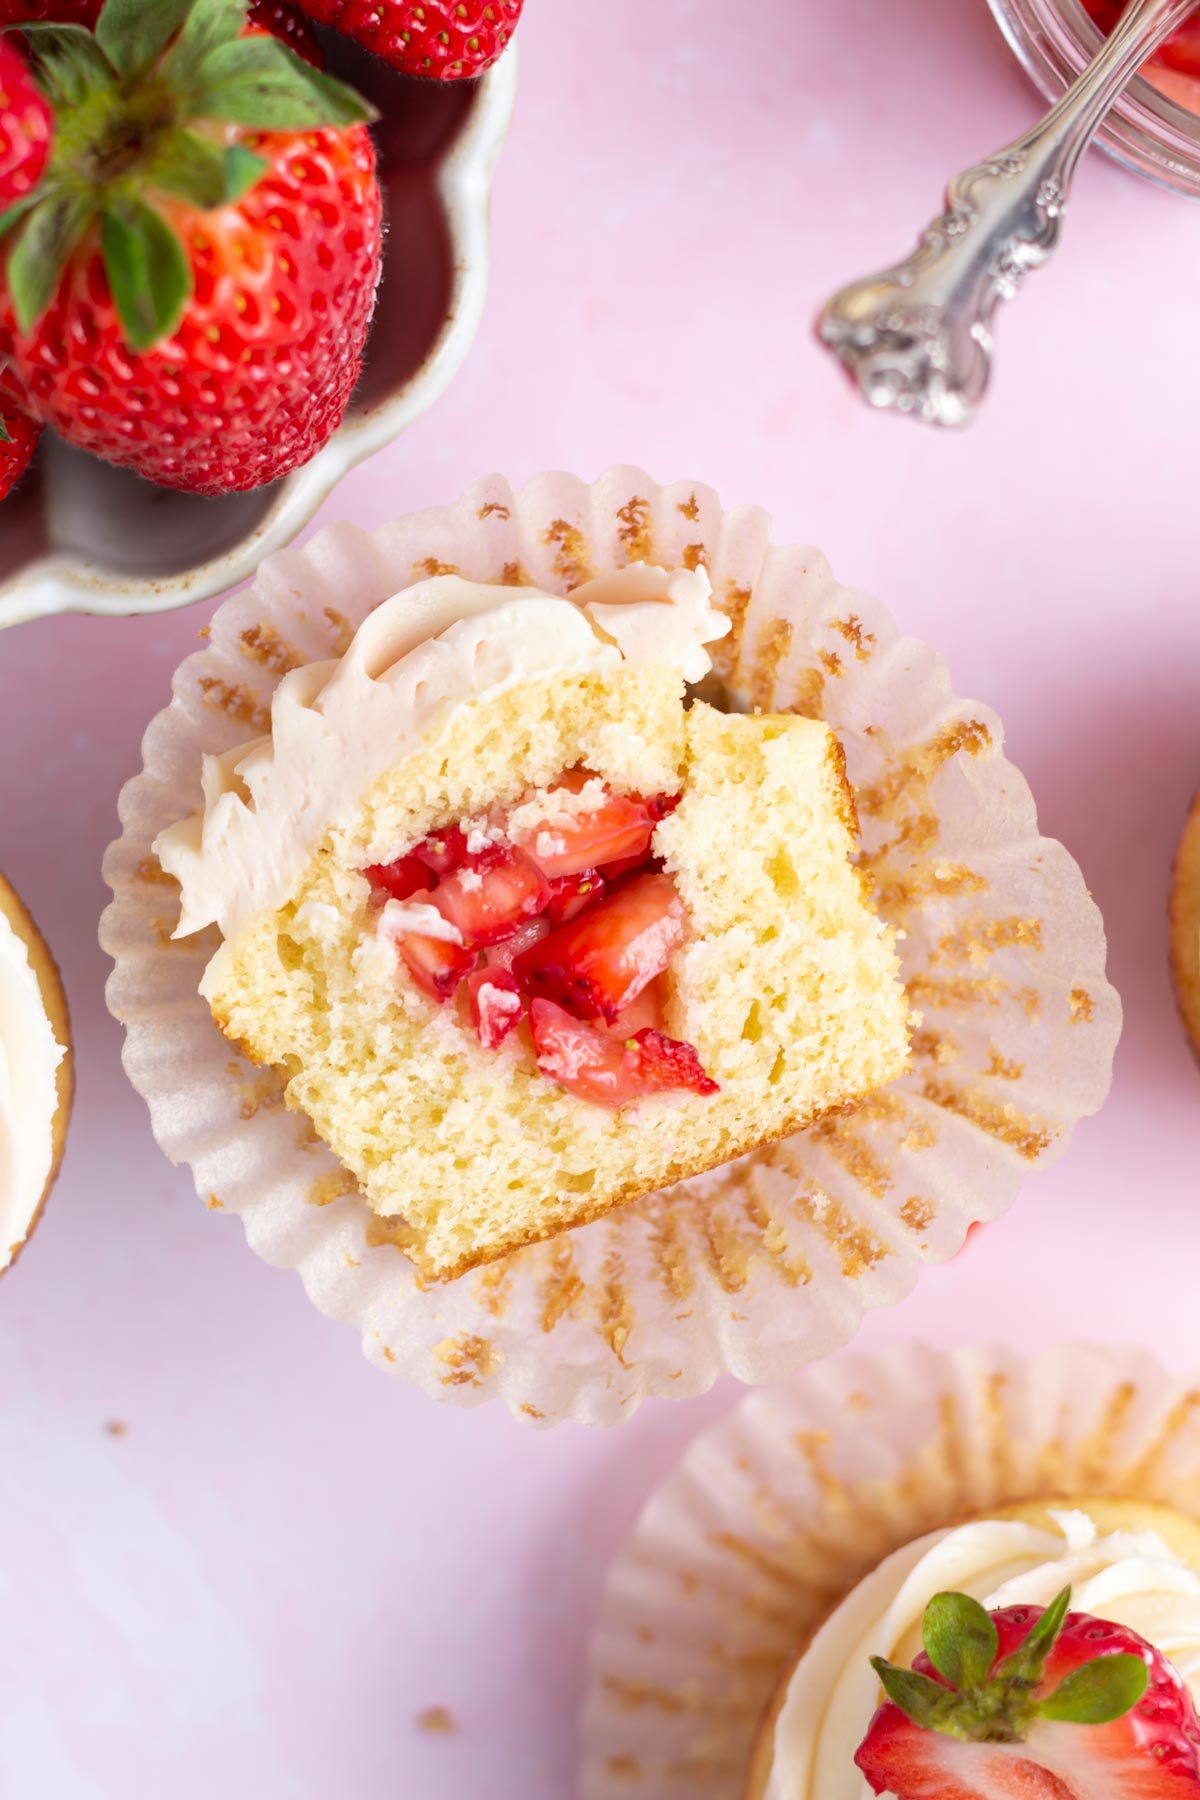 The inside of a strawberry filled cupcake.